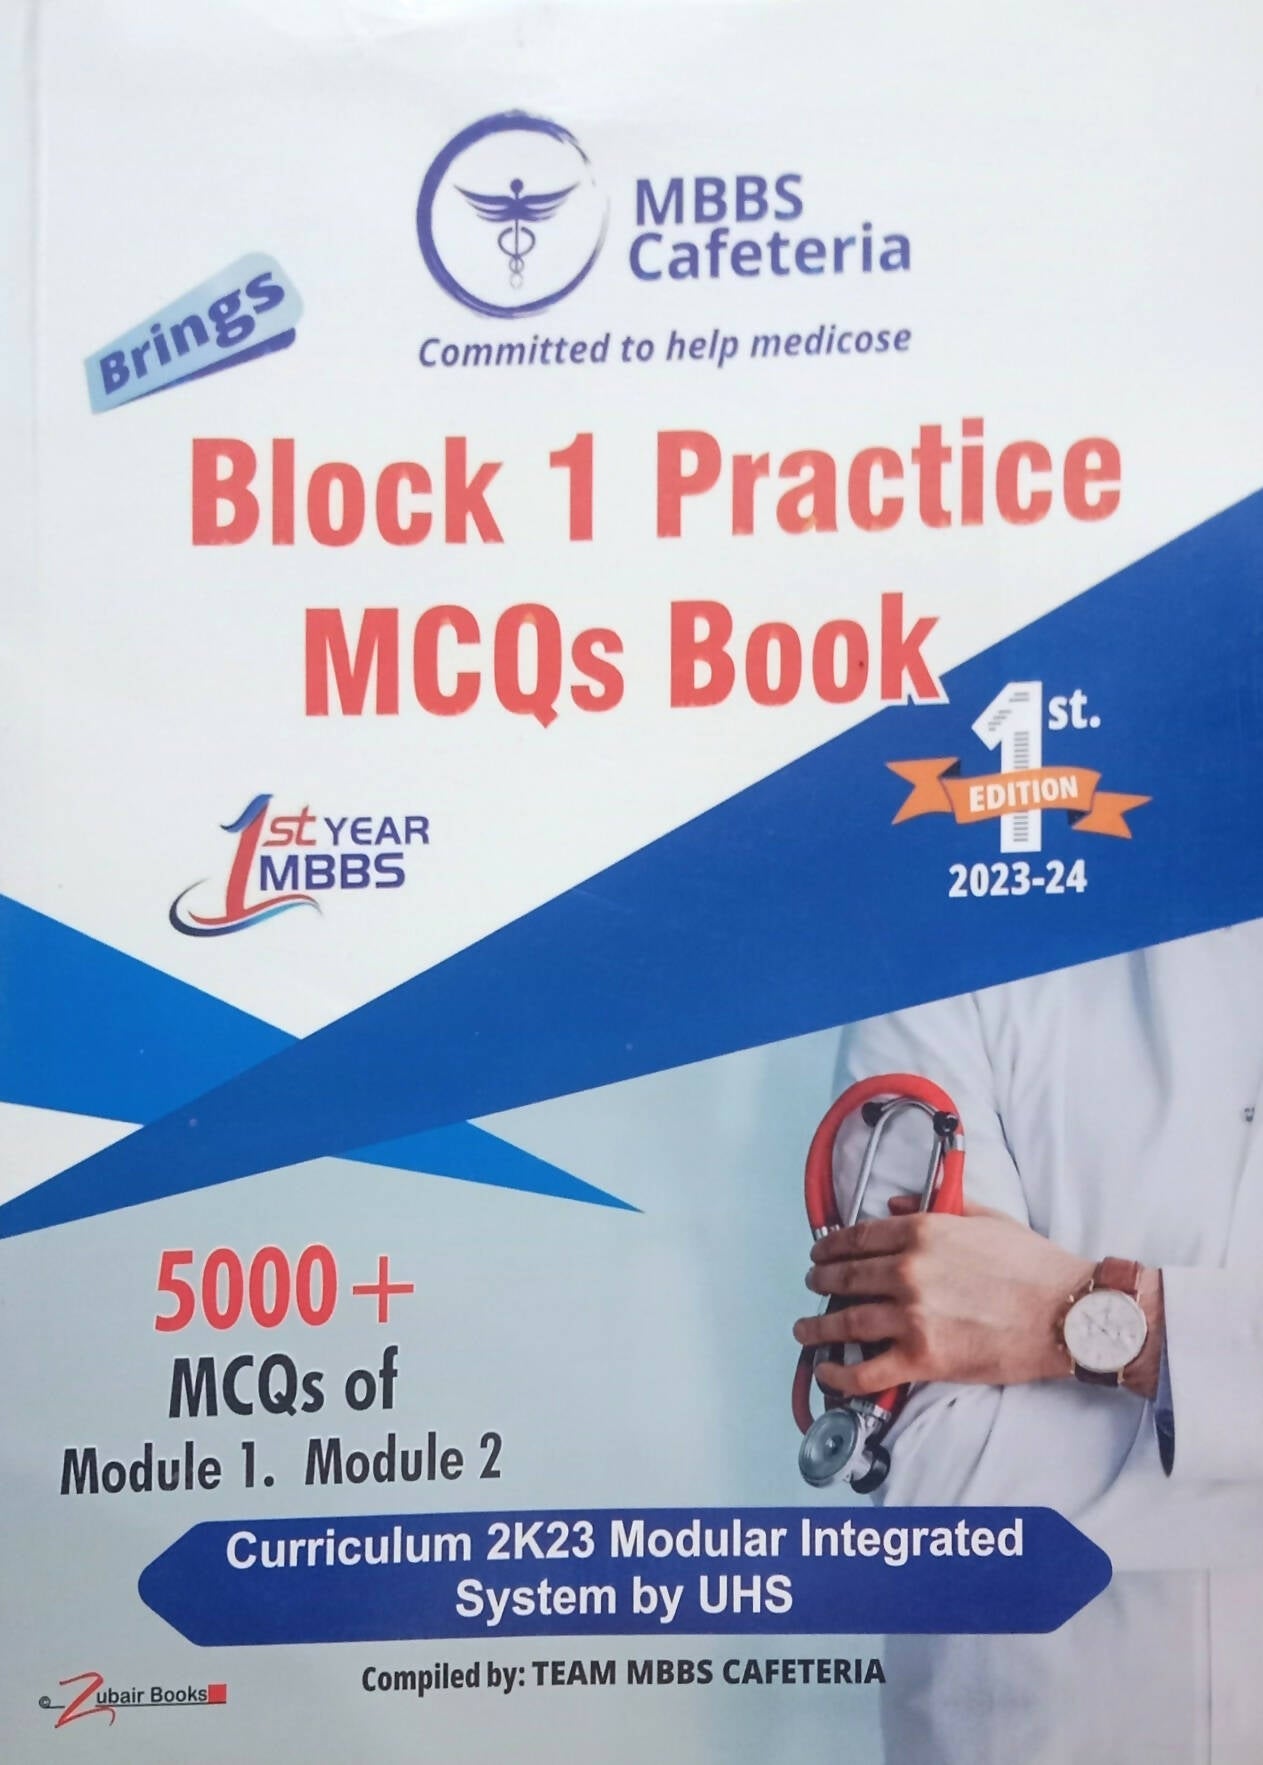 Brings MBBS Cafeteria Committed to Help Medicose Block 1 Practice MCQs Book 1st Year MBBS 5000 + MCQs Of Module 1 Module 2 Curriculum 2023 Modular Integrated System Muhammad Rafay Ur Rehman NEW BOOKS N BOOKS